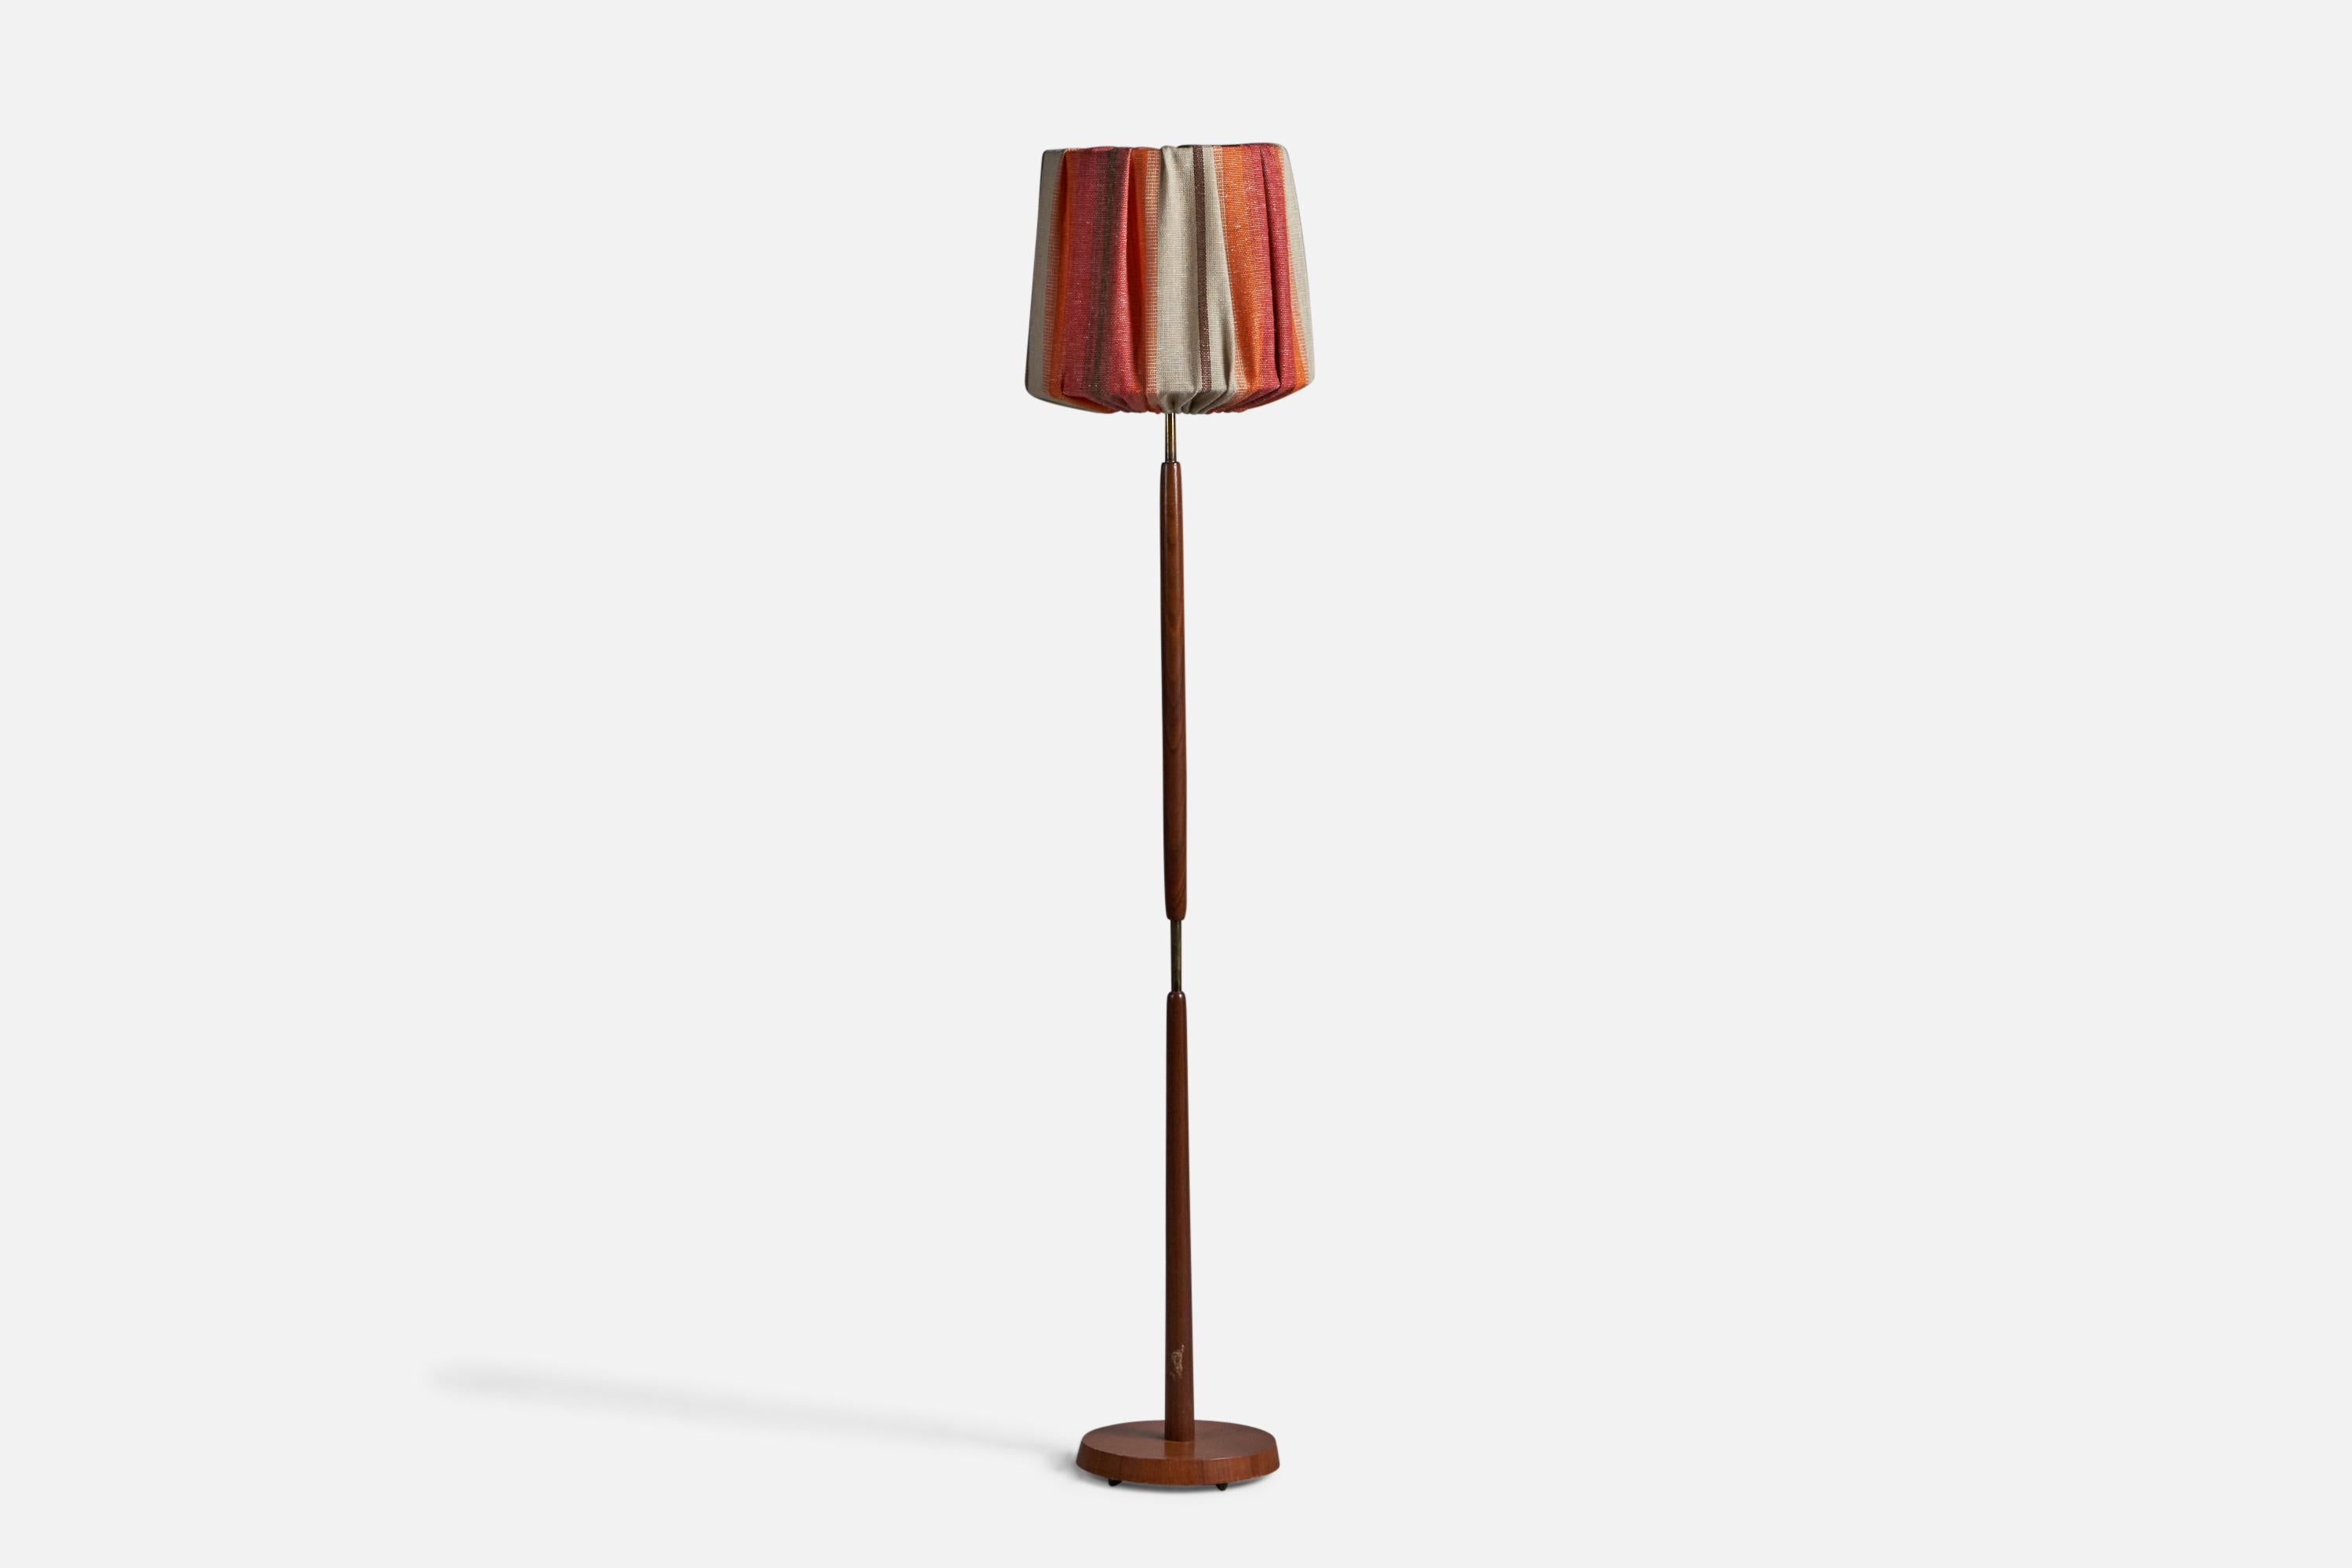 A teak, brass and red grey woven fabric lampshade, designed and produced in Sweden, c. 1950s.

Overall Dimensions (inches): 56.5